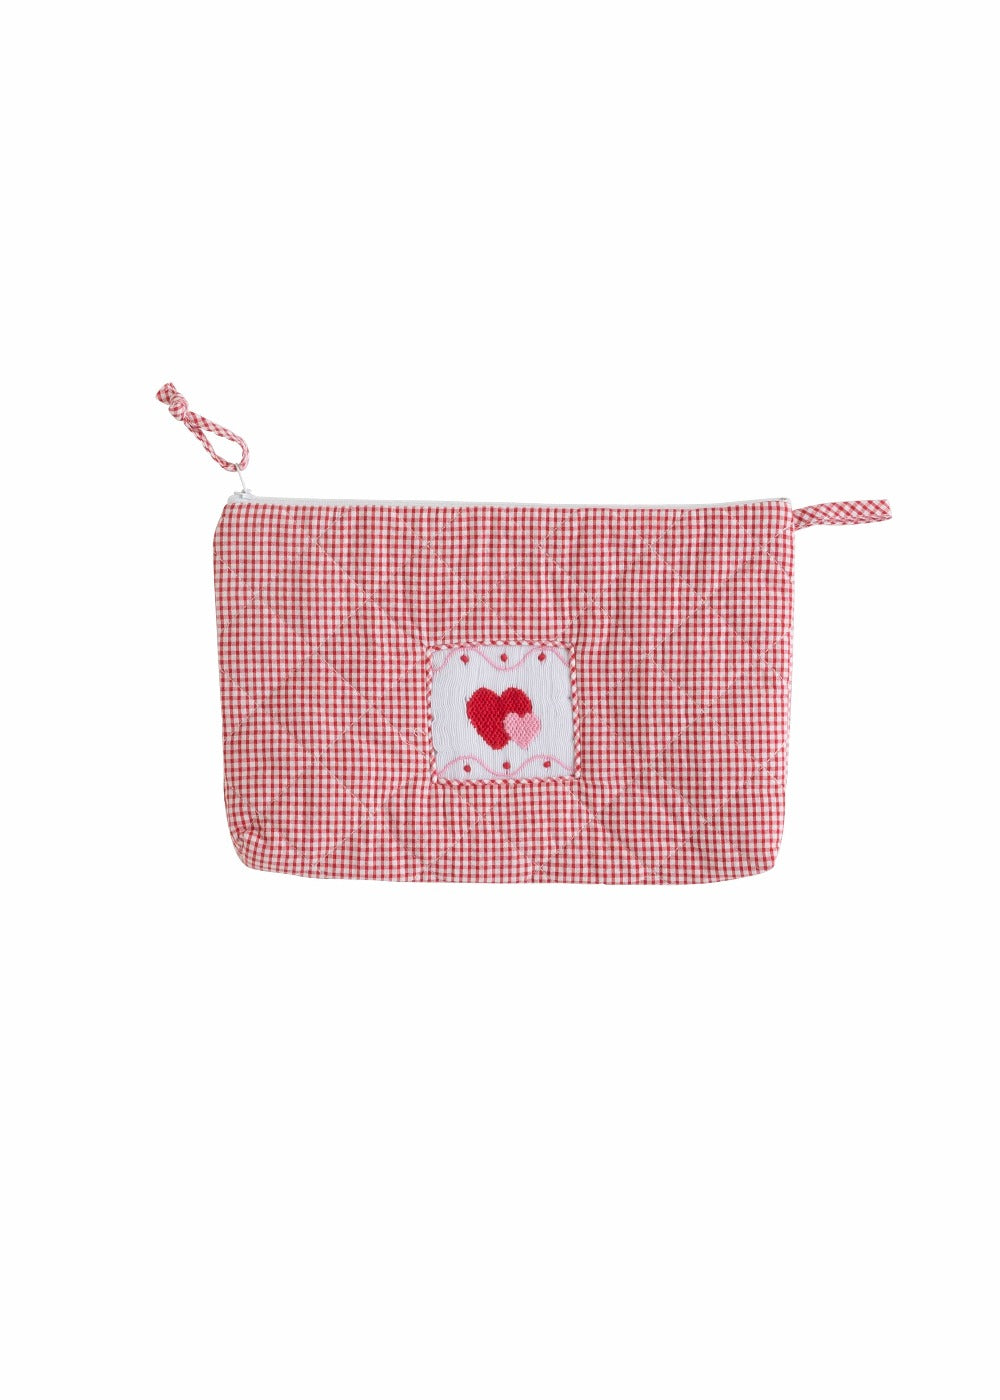 seguridadindustrialcr classic children's luggage red hearts cosmetic bag